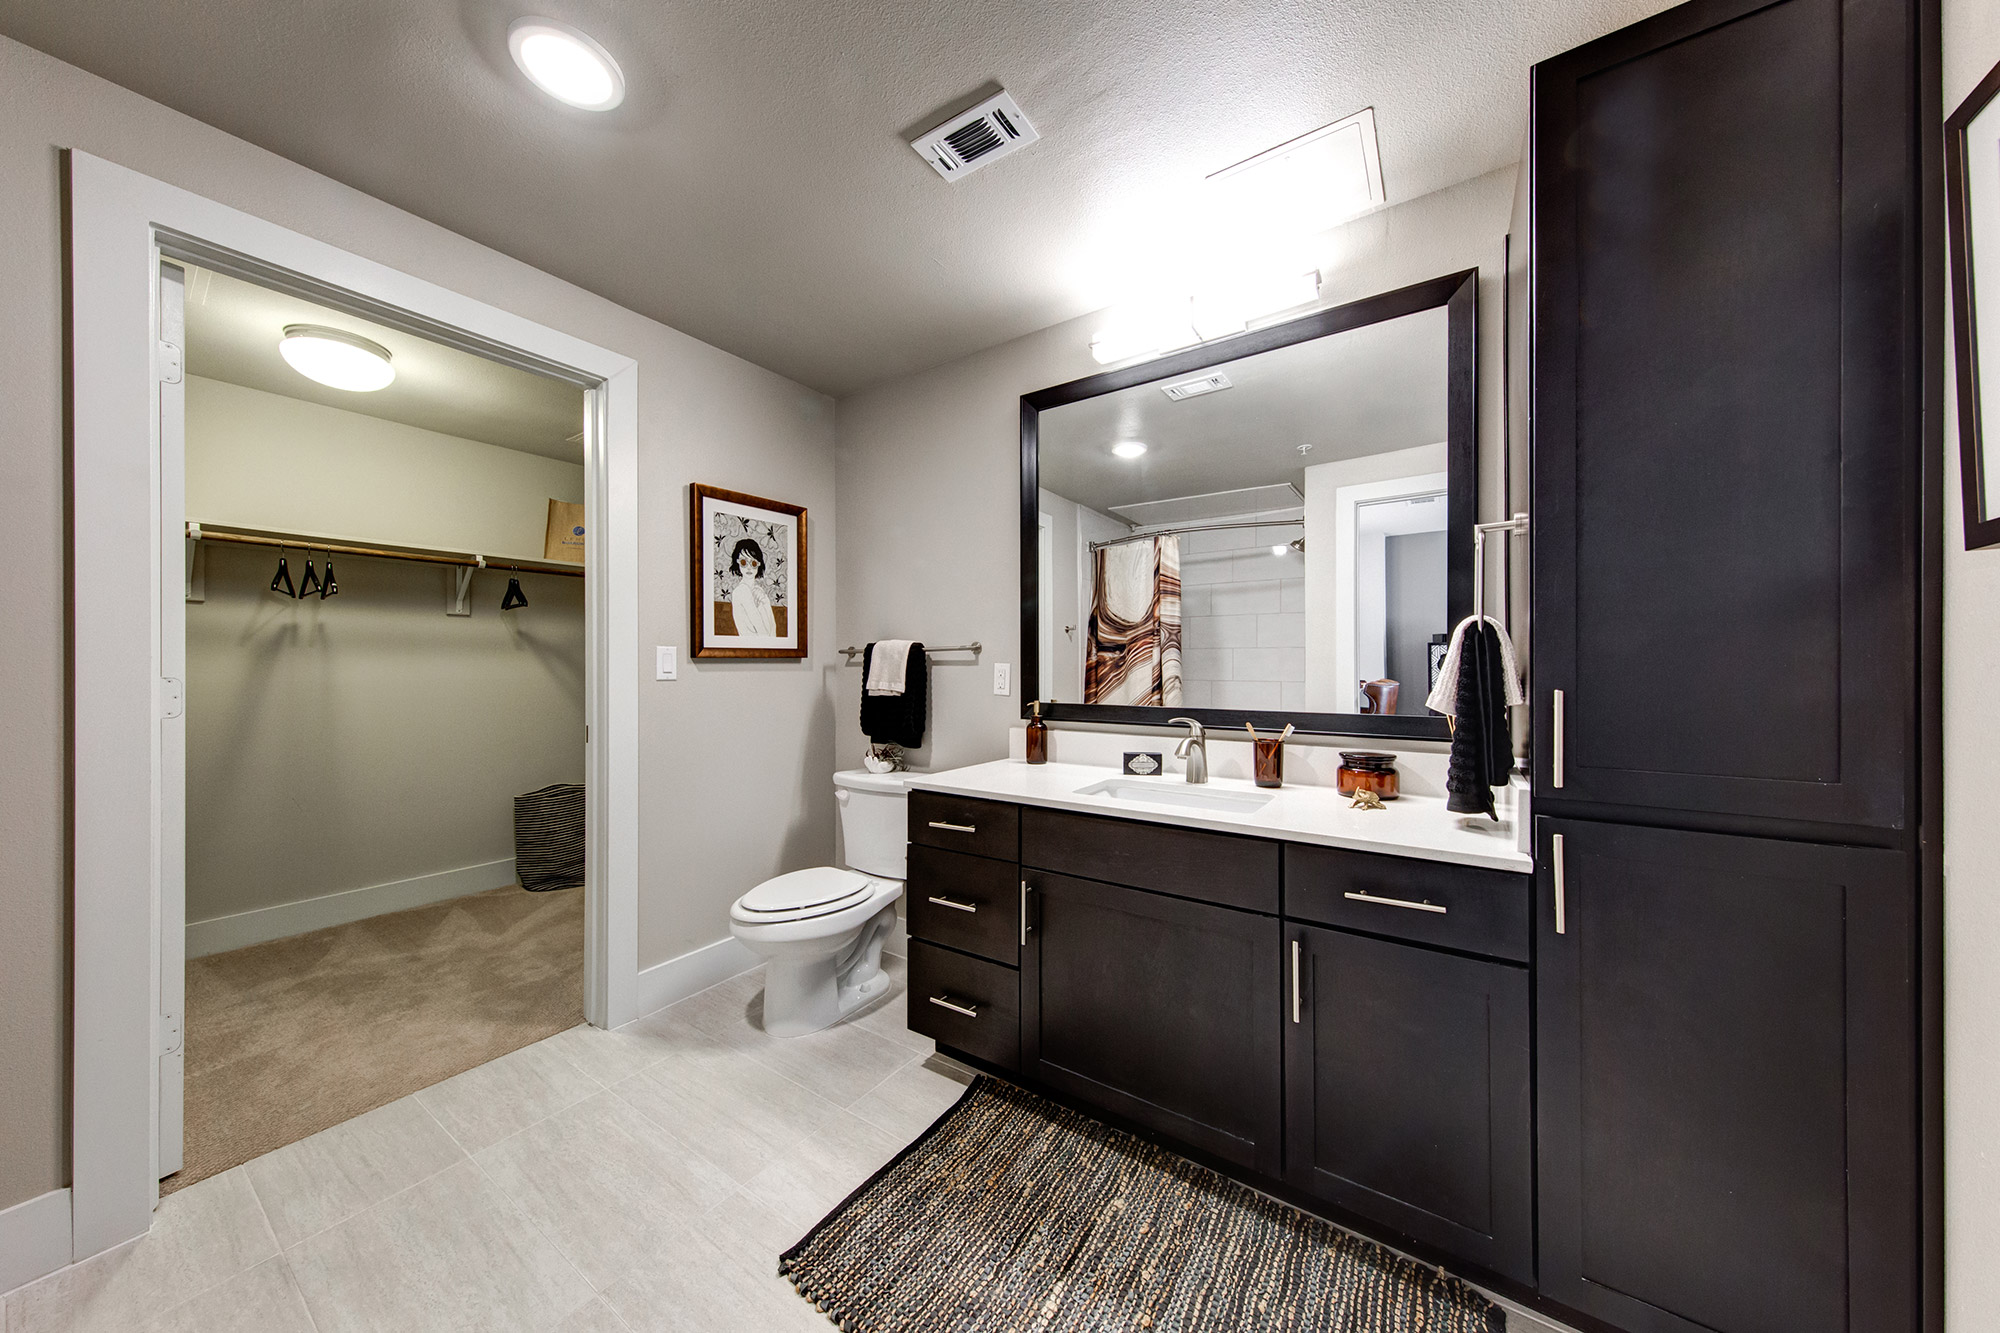 Bathroom with quartz counters, walk-in closet, and black cabinetry